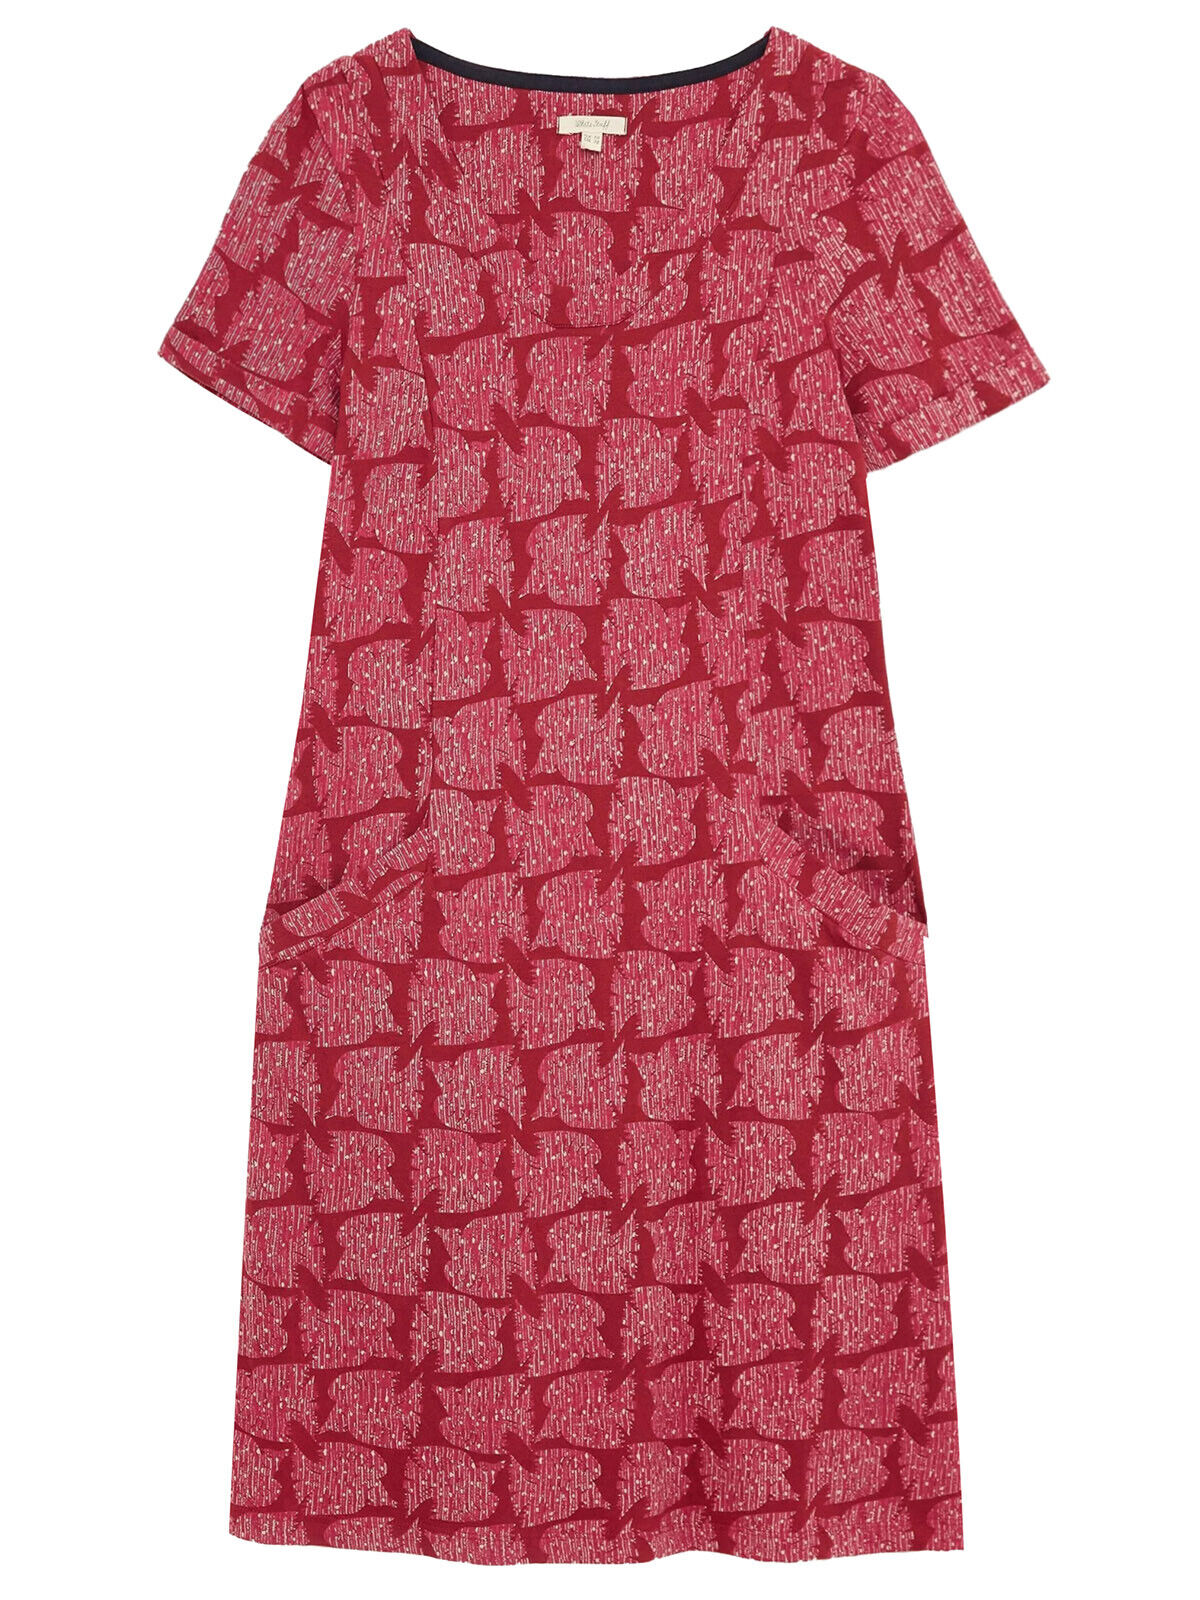 EX WHITE STUFF Red Selina Fairtrade Dress in Sizes 10, 12, 14 RRP £55